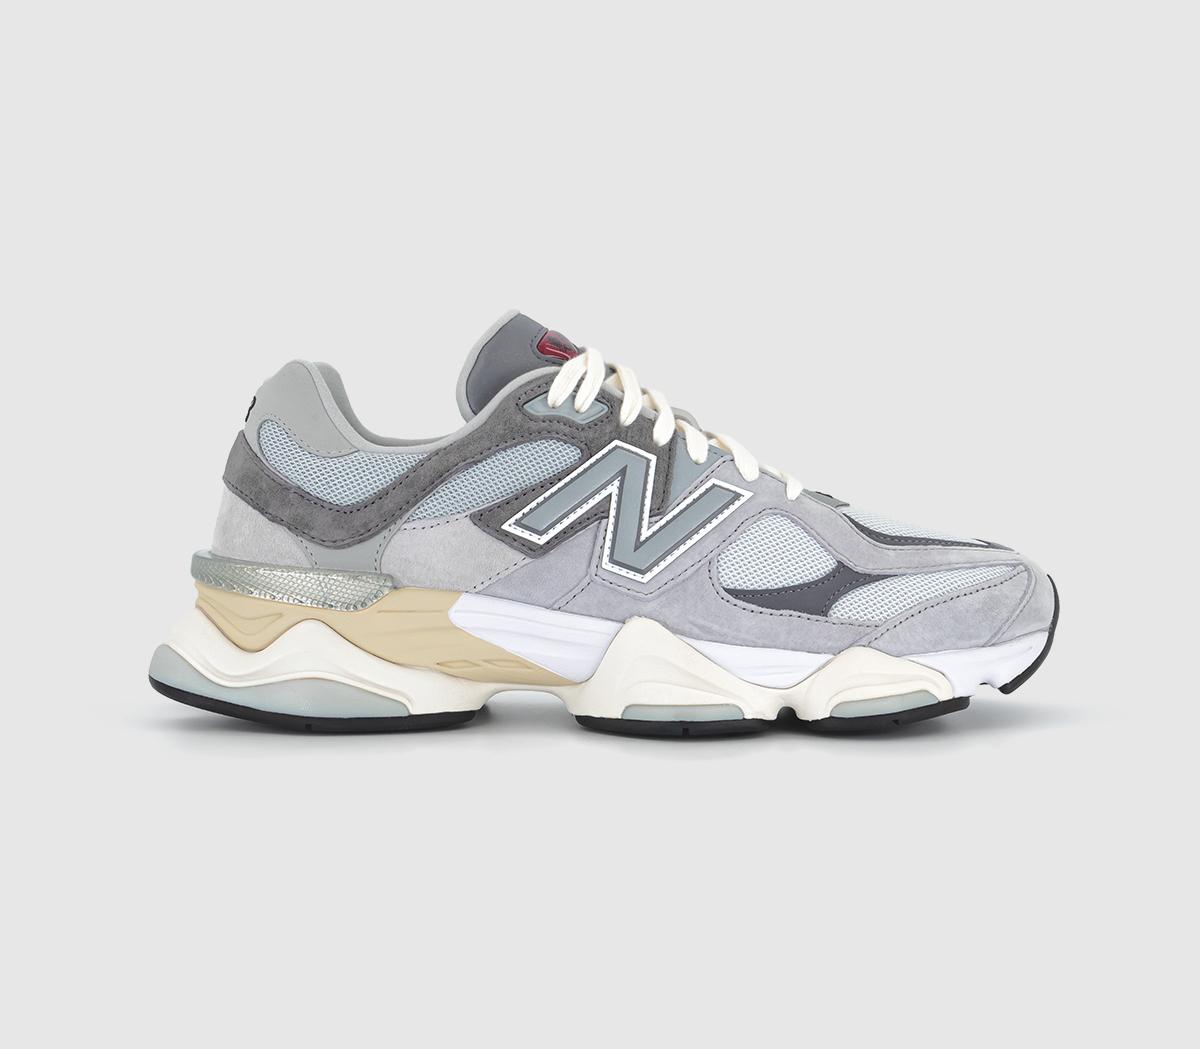 Grey　9060　Trainers　New　Men's　Balance　Trainers